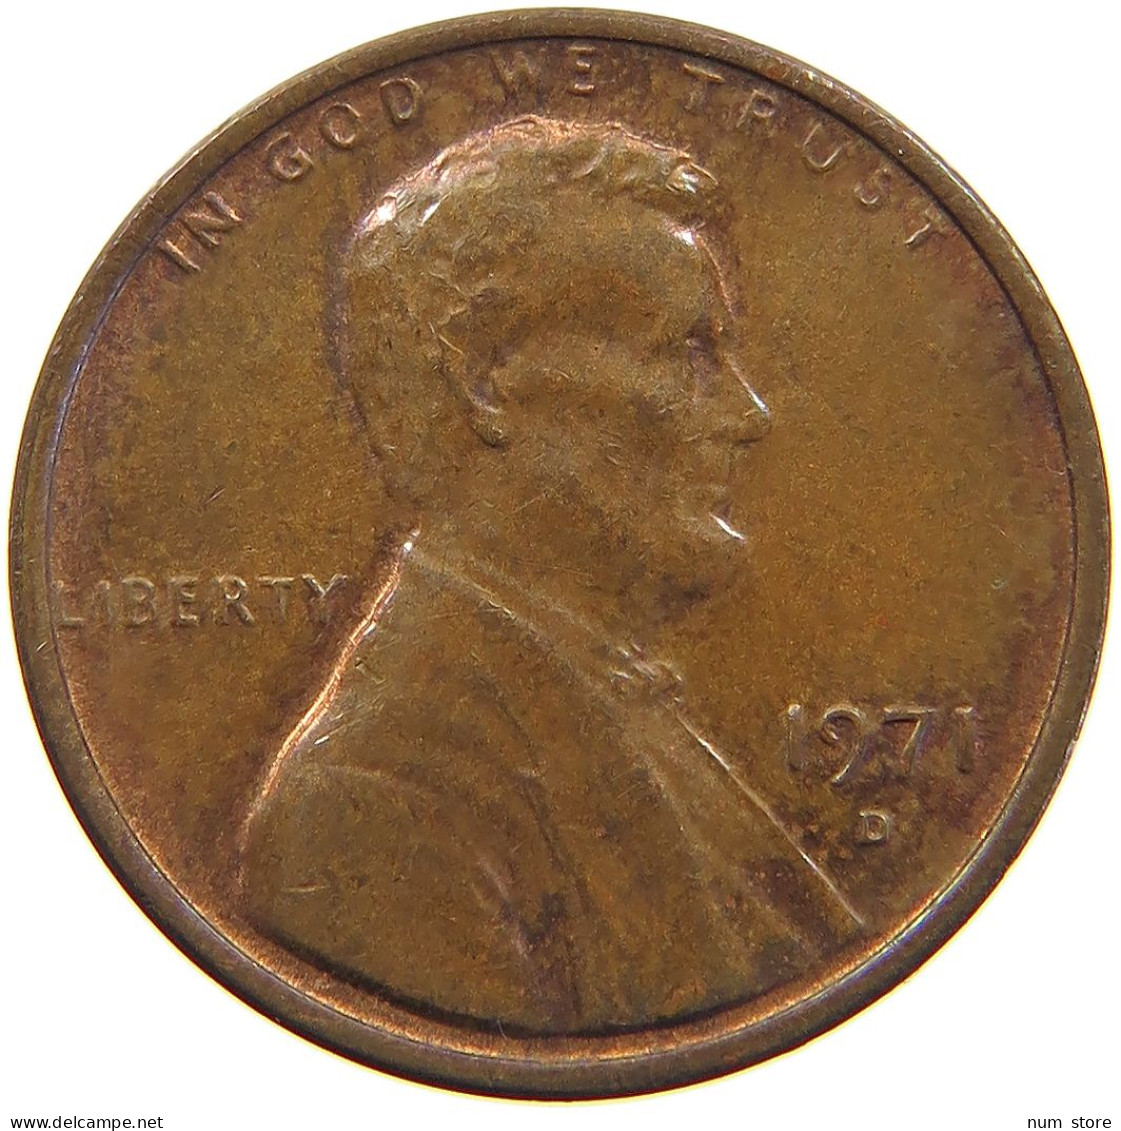 UNITED STATES OF AMERICA CENT 1971 D LINCOLN MEMORIAL #c079 0243 - 1959-…: Lincoln, Memorial Reverse